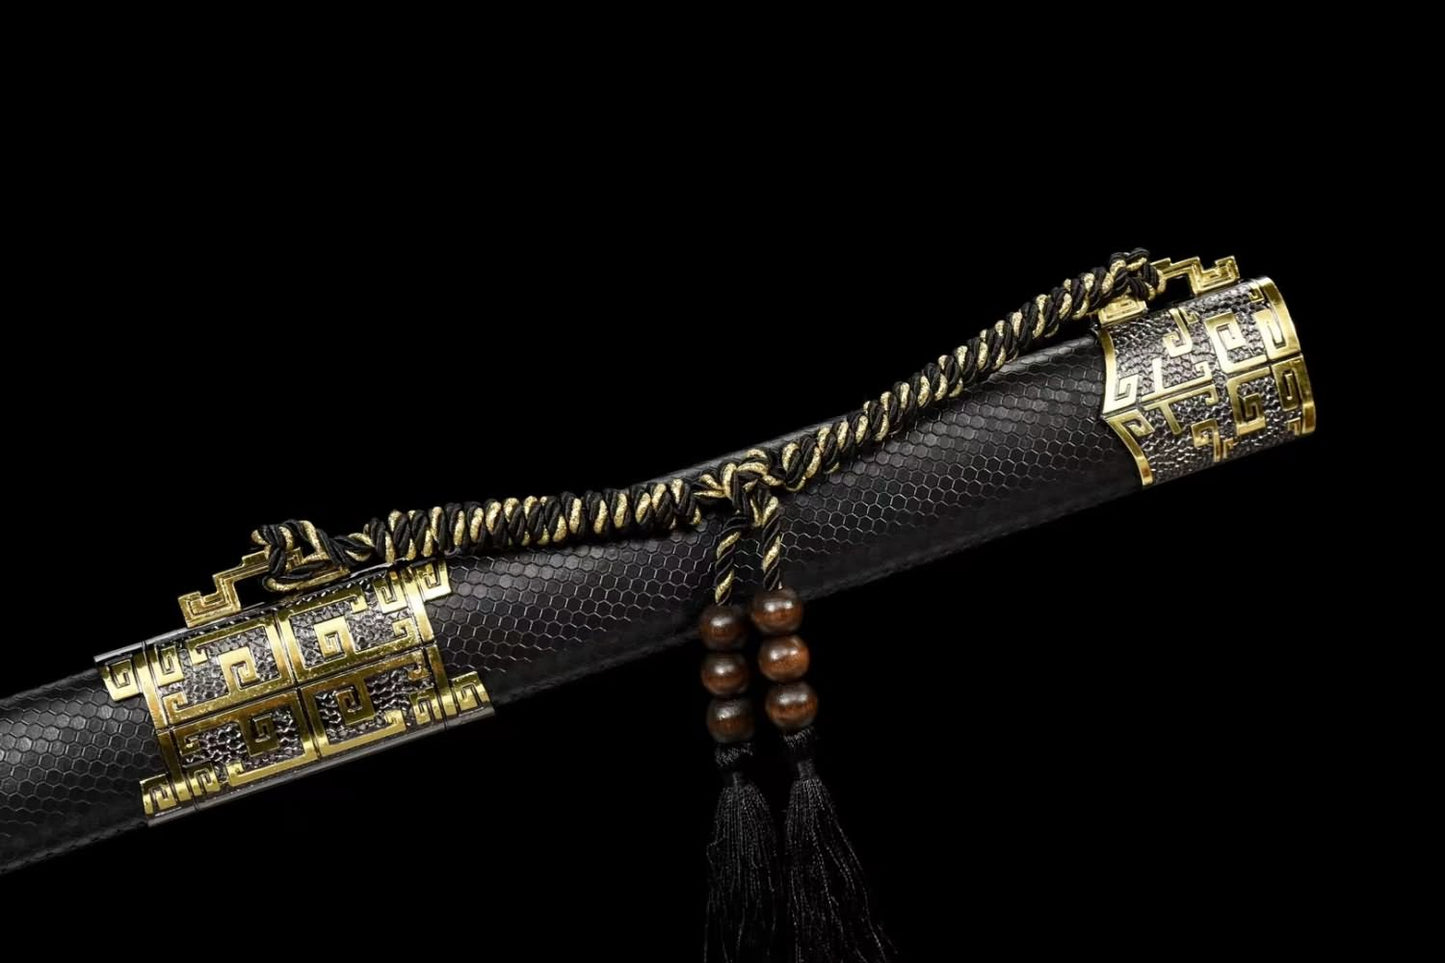 Black Gold Ancient Swords-Handcrafted High Carbon Steel Blade with Alloy Fittings and Real Wood Wrapped Faux Leather Scabbard